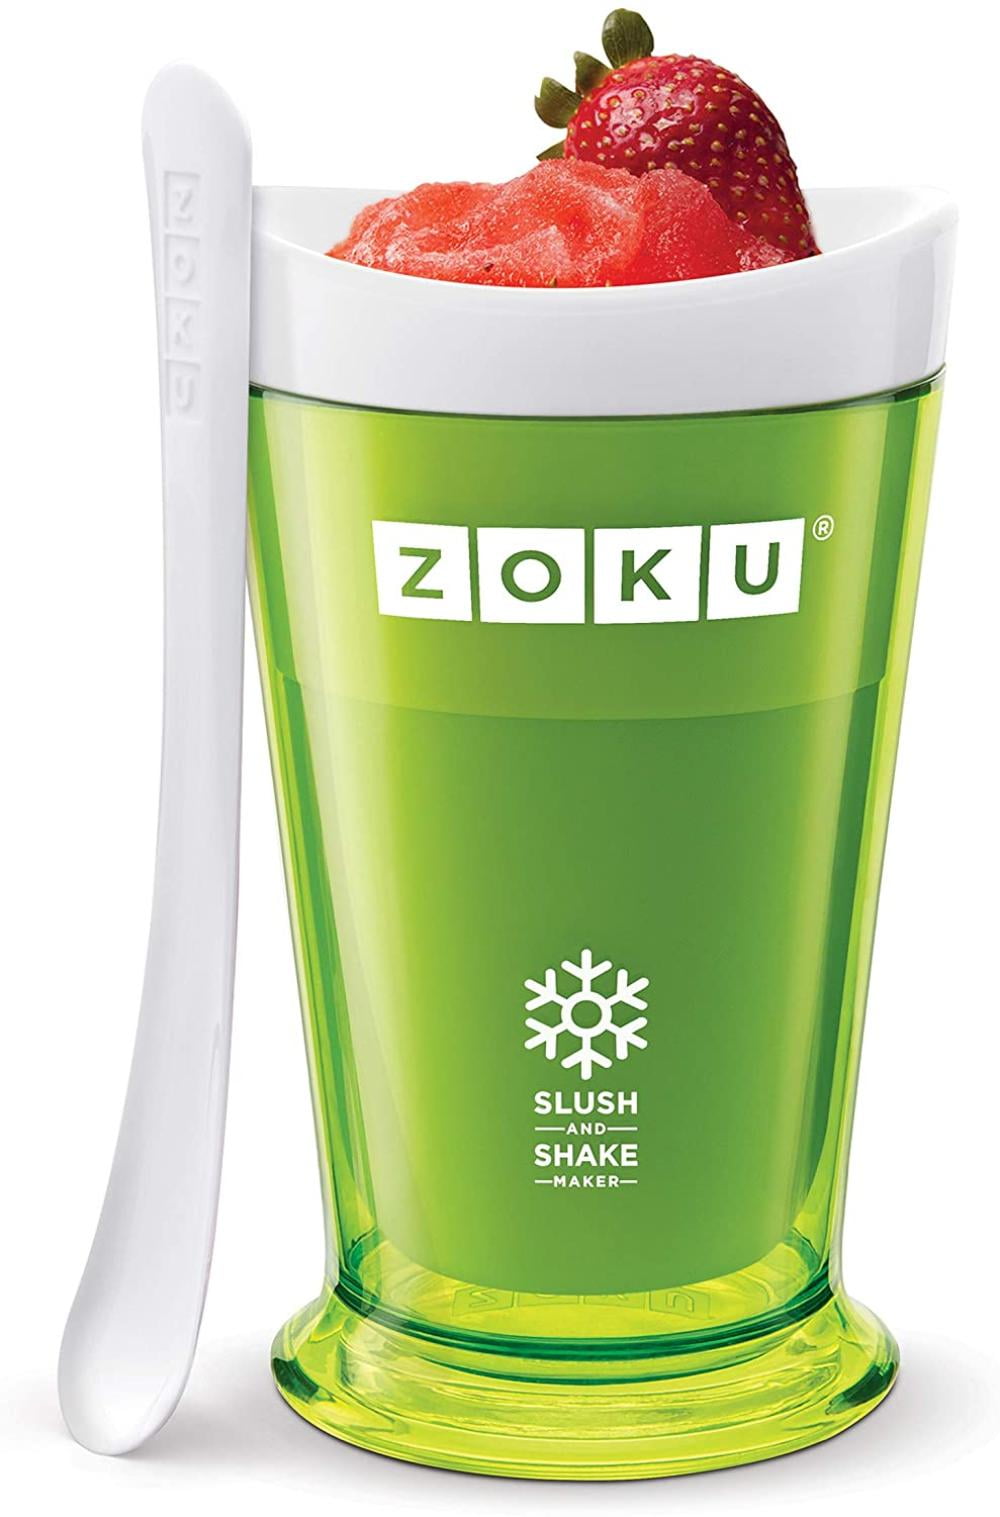 Compact Make and Serve Cup with Freezer Core Creates Single-serving Smoothies Slushies and Milkshakes in Minutes BPA-free Zoku Slush and Shake Maker Blue 